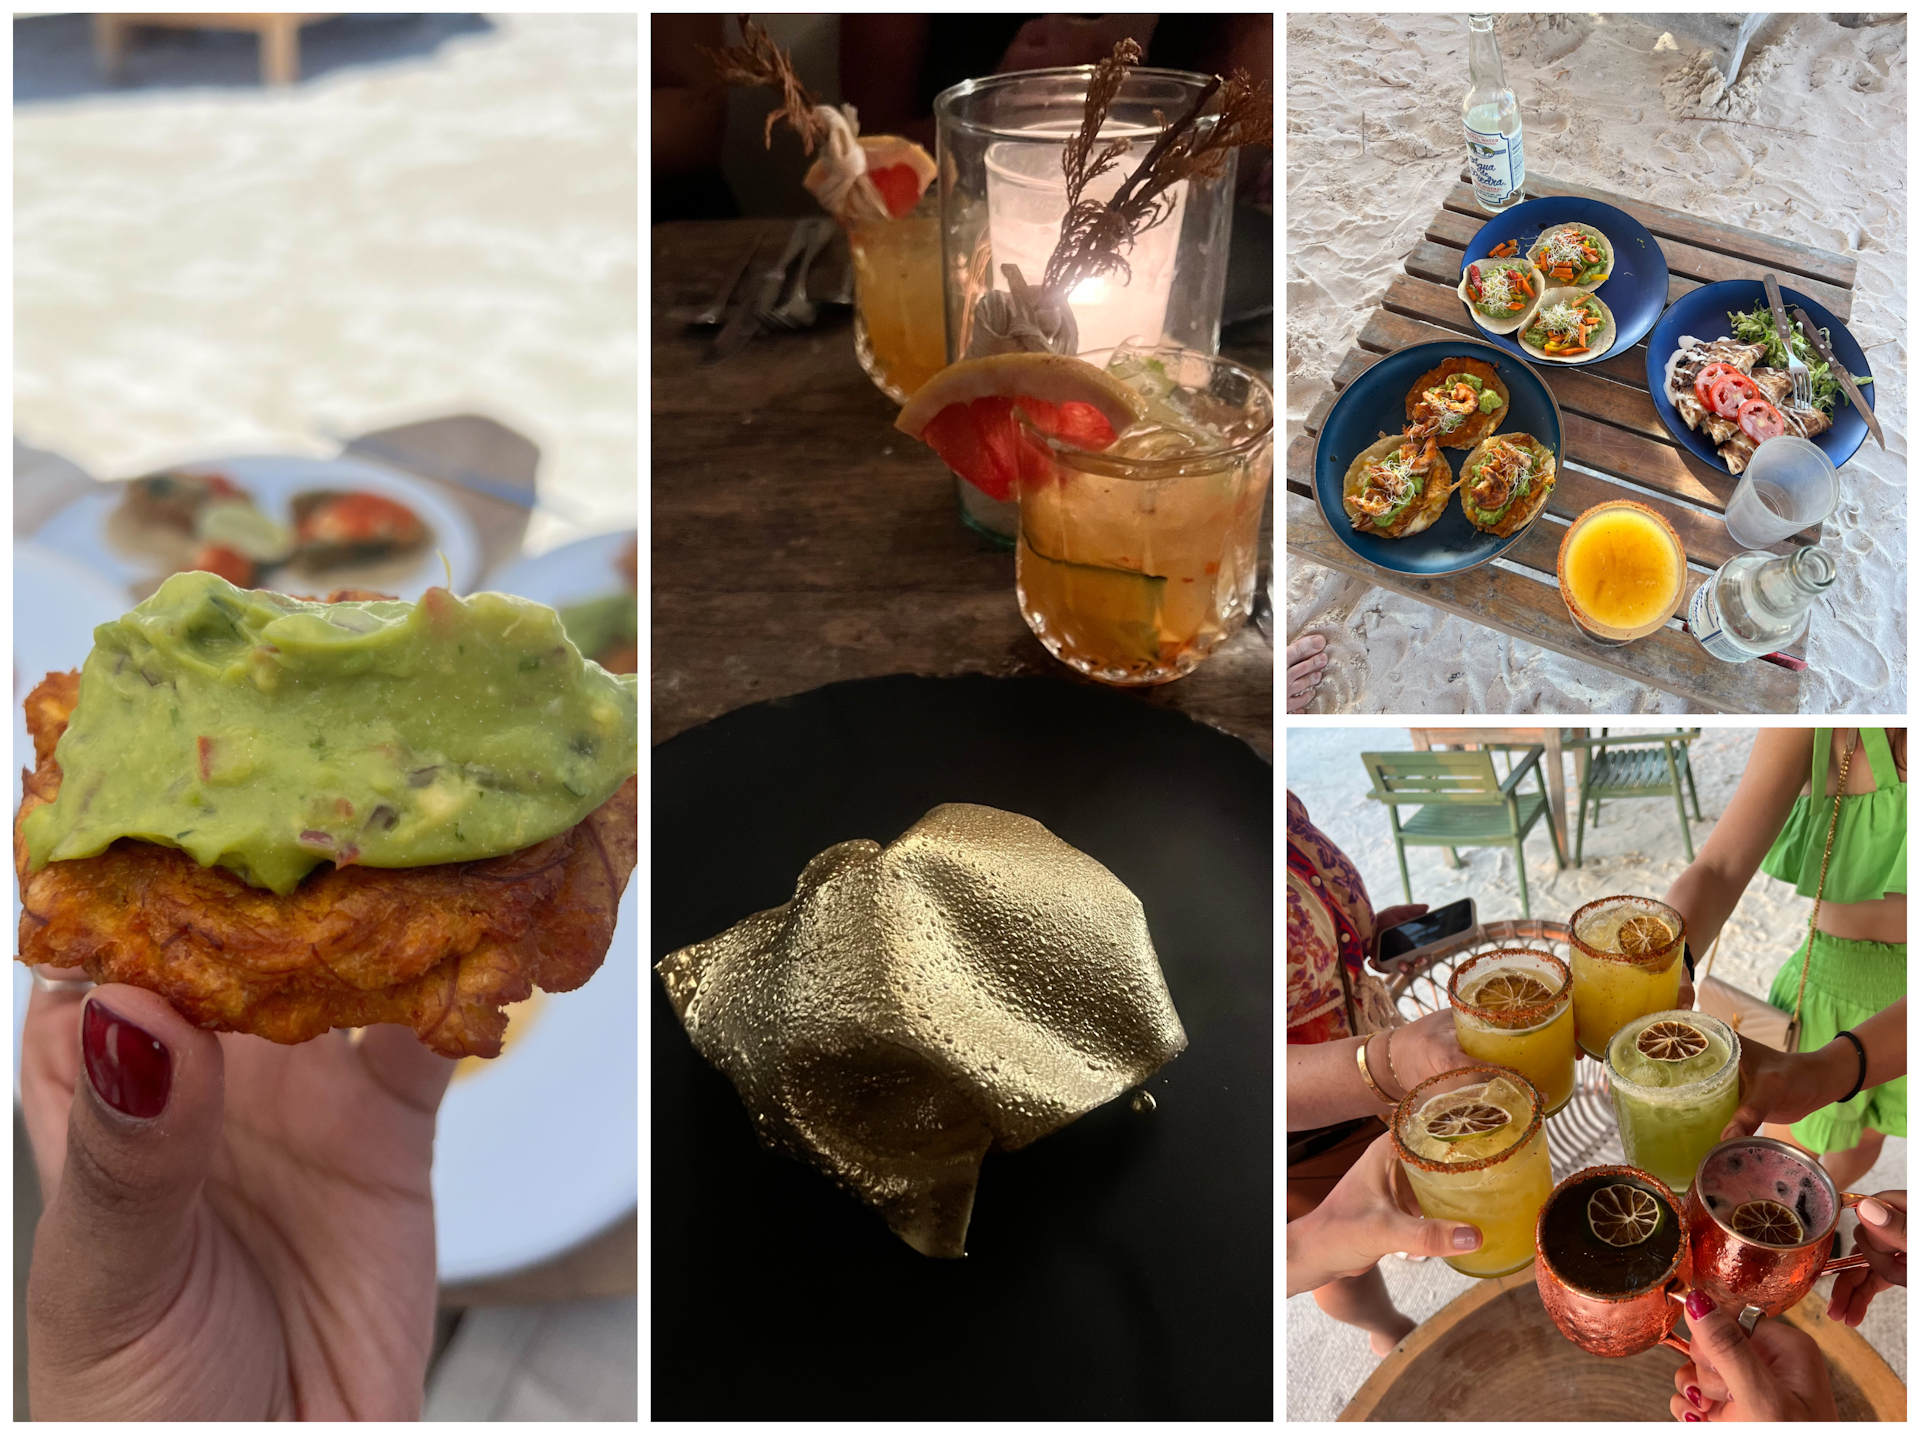 Collage of food images featuring cocktails, tostones and a gold-leaf haute cusine dish